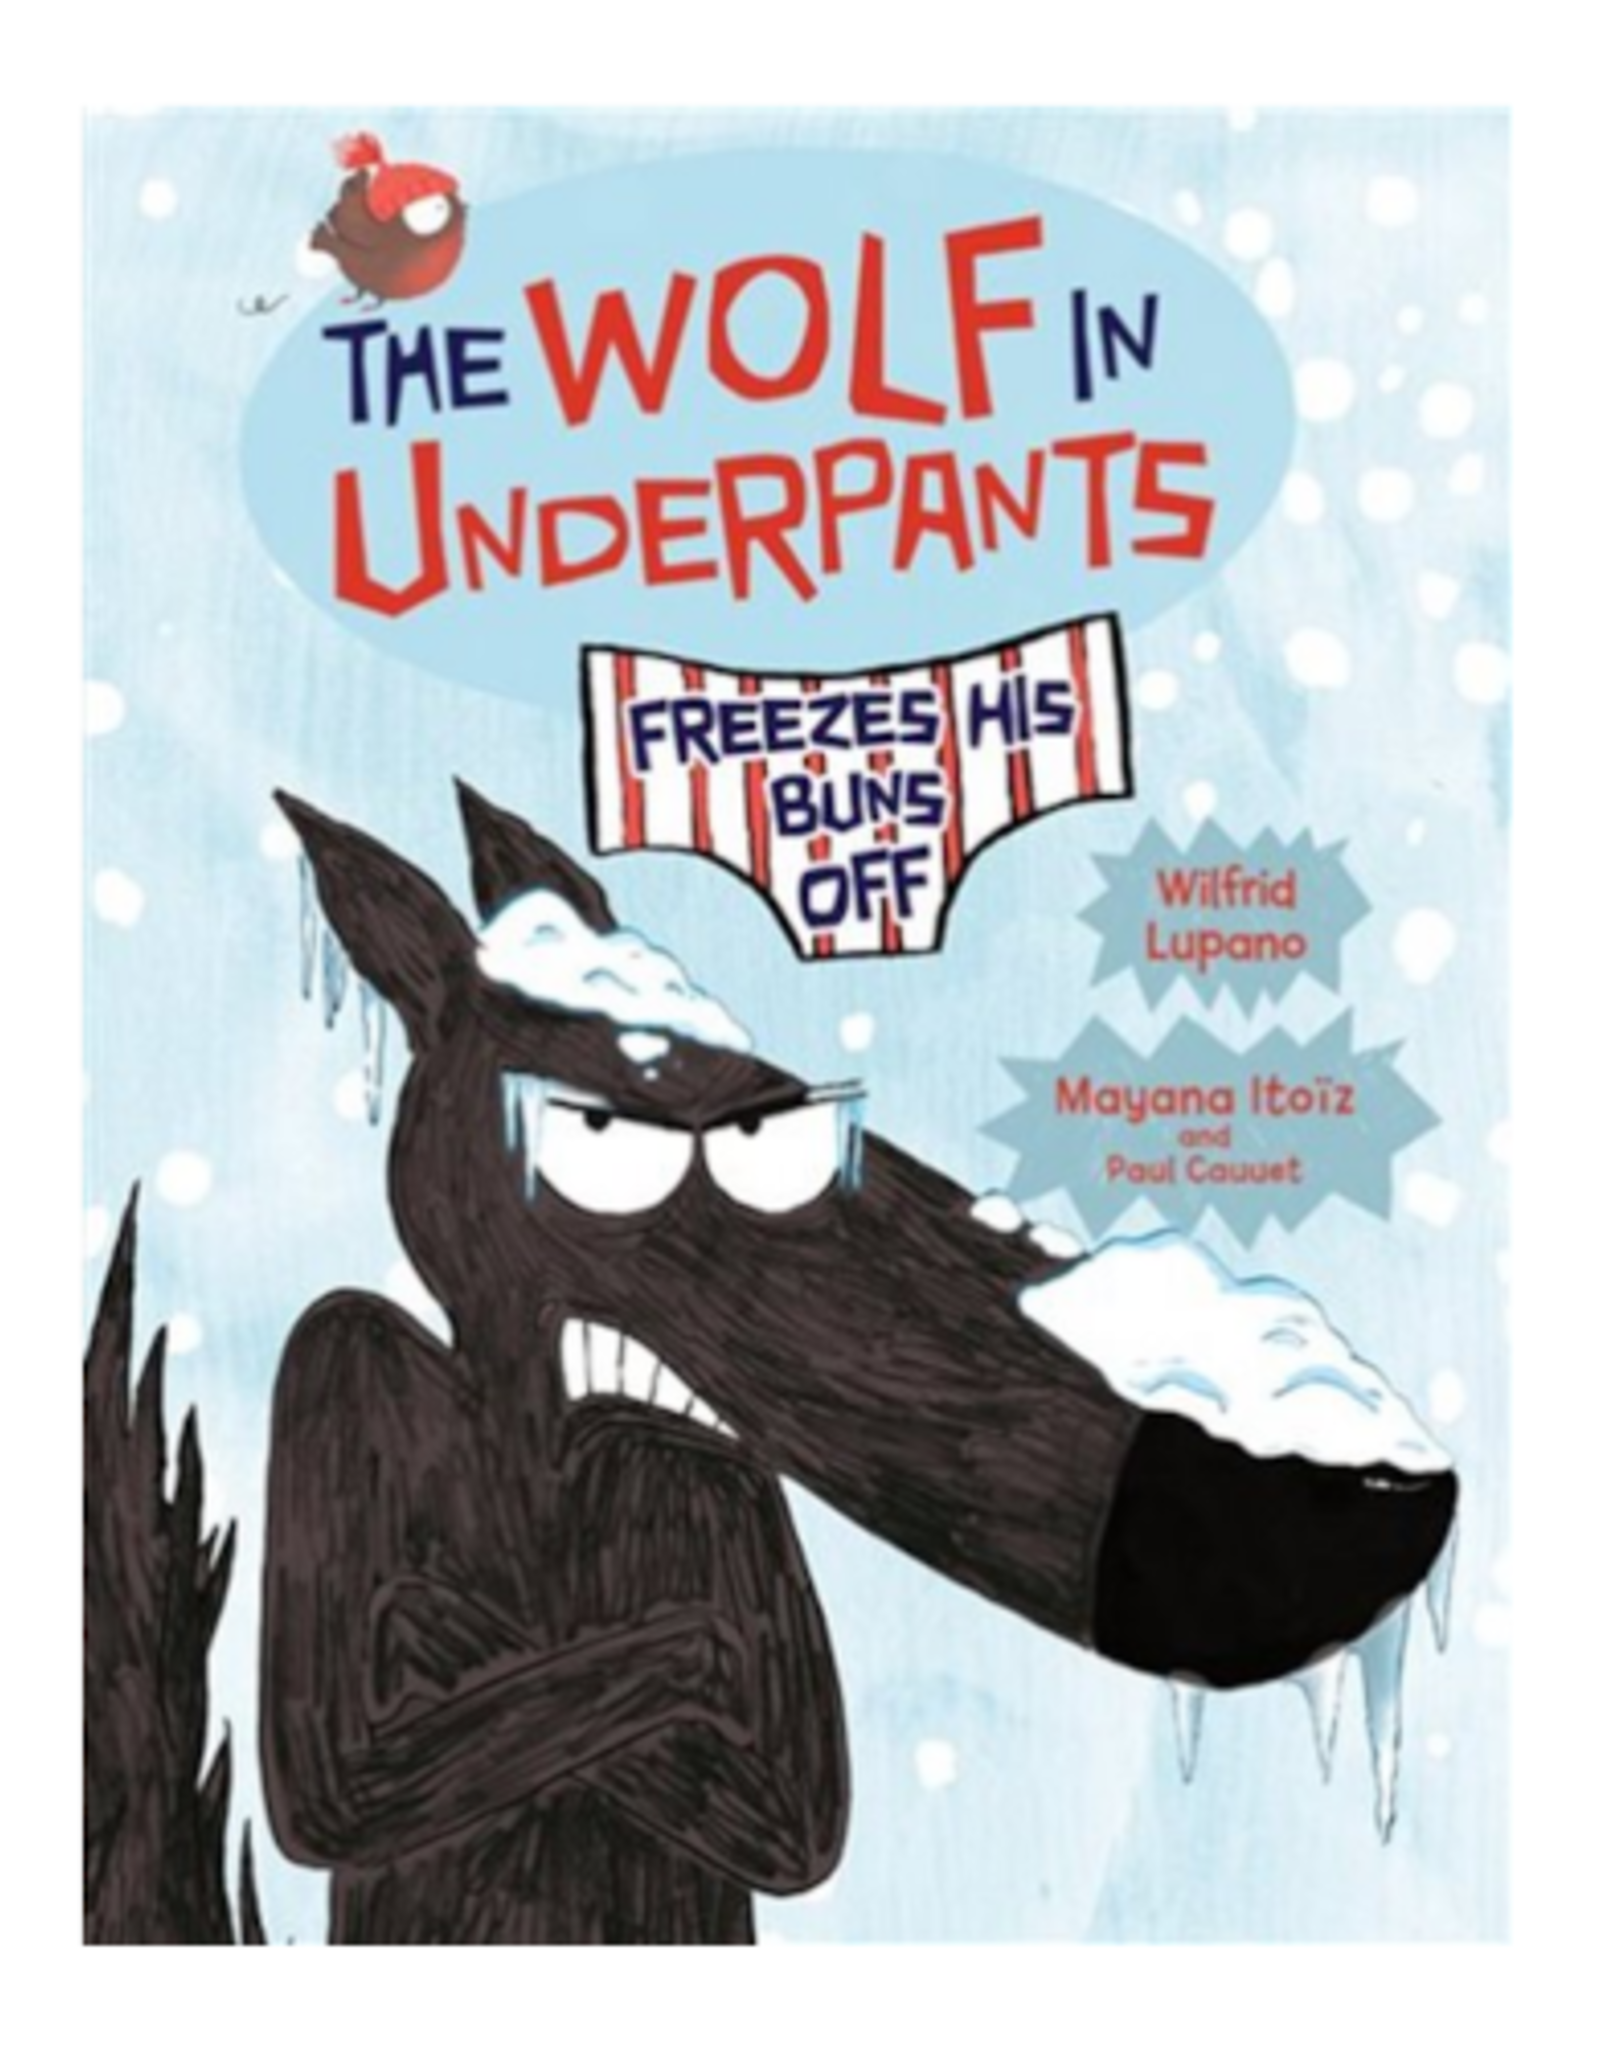 Thomas Allen Books Book - The Wolf in Underpants Freezes His Buns Off